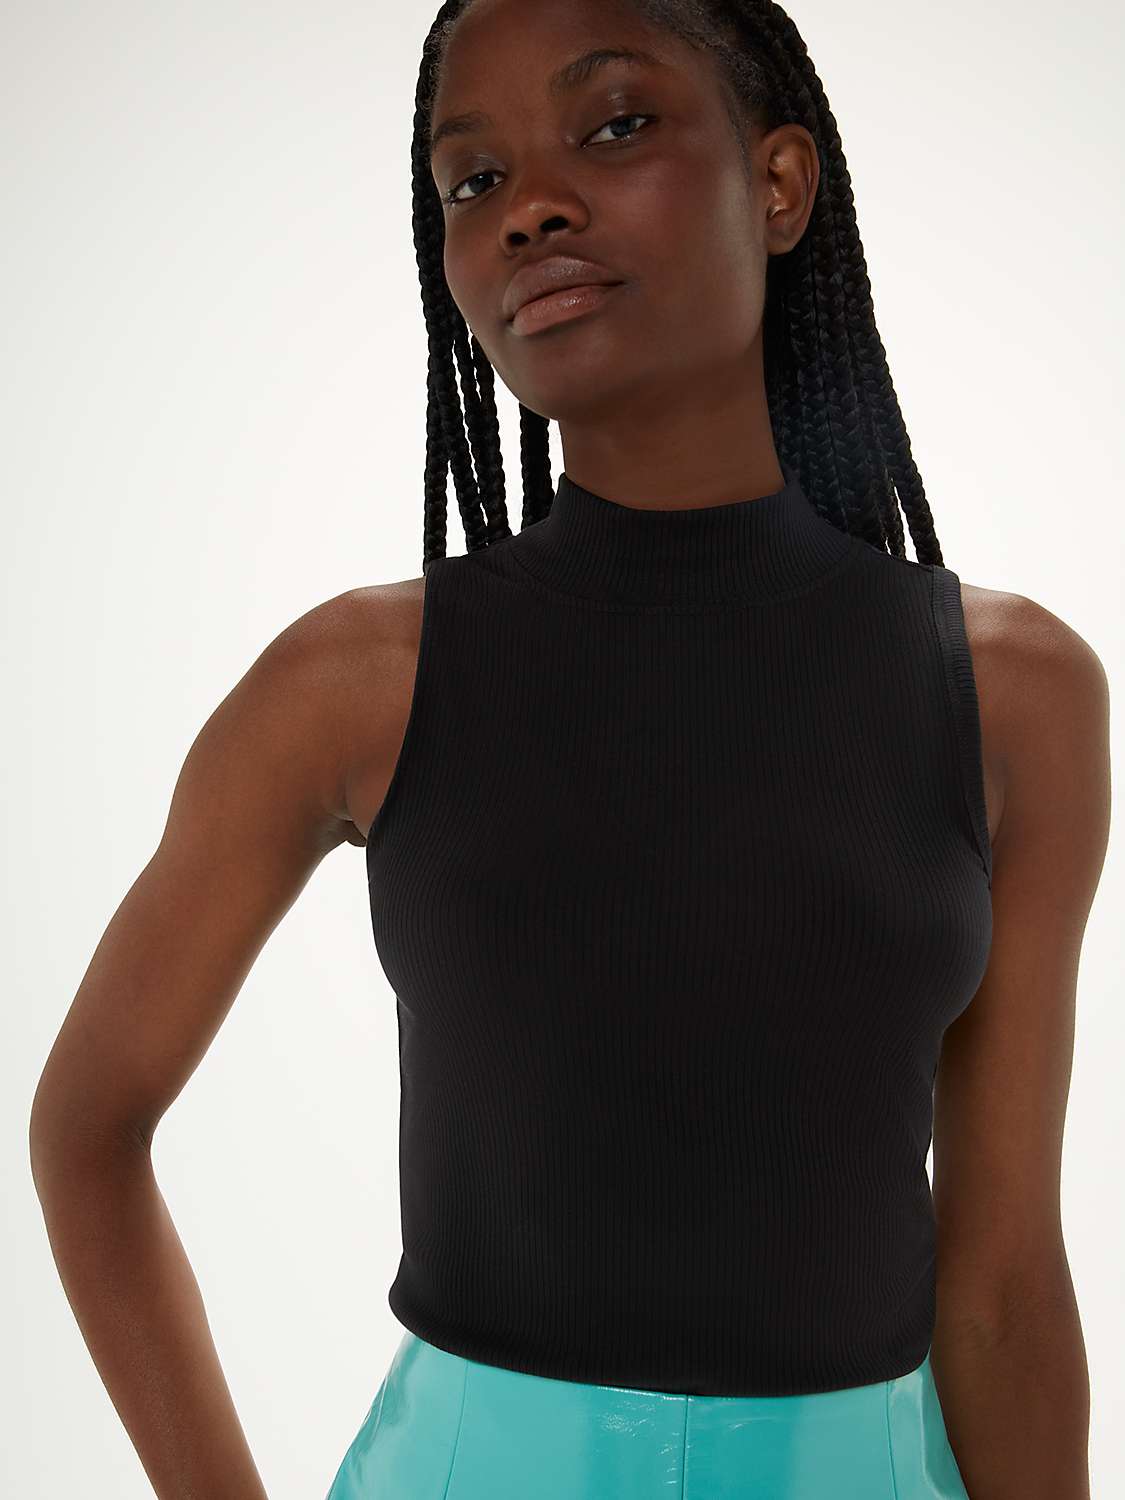 Buy Whistles Ecovero Keyhole Cut Out Top, Black Online at johnlewis.com